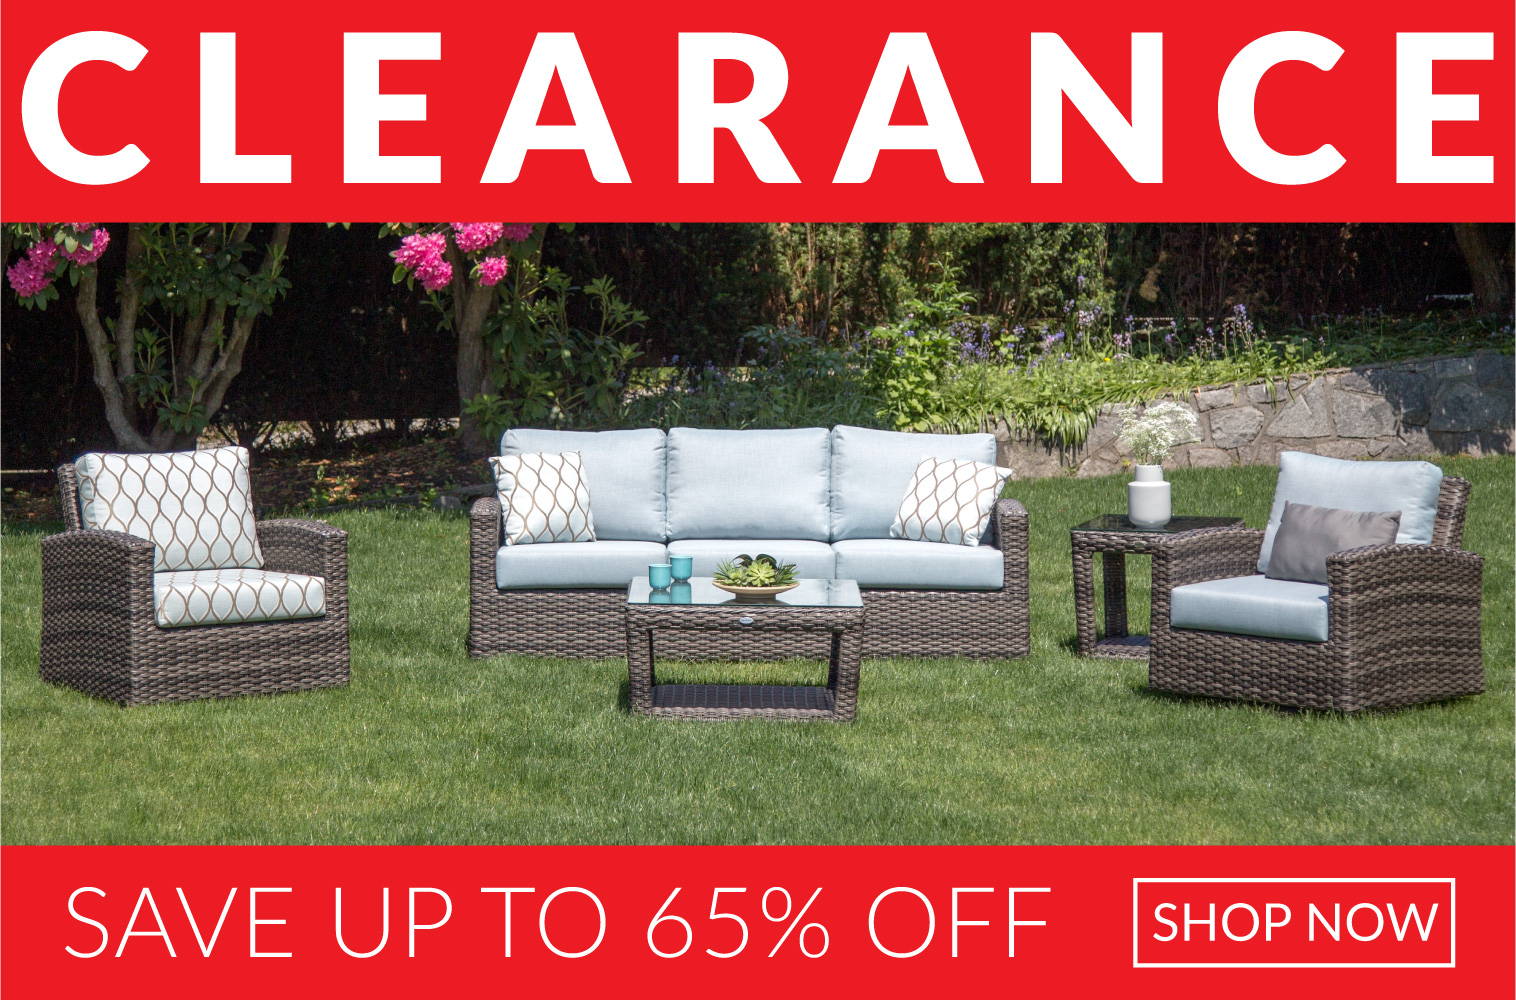 Winter Clearance Sale on Portfino Outdoor Seating - Save up to 65% off